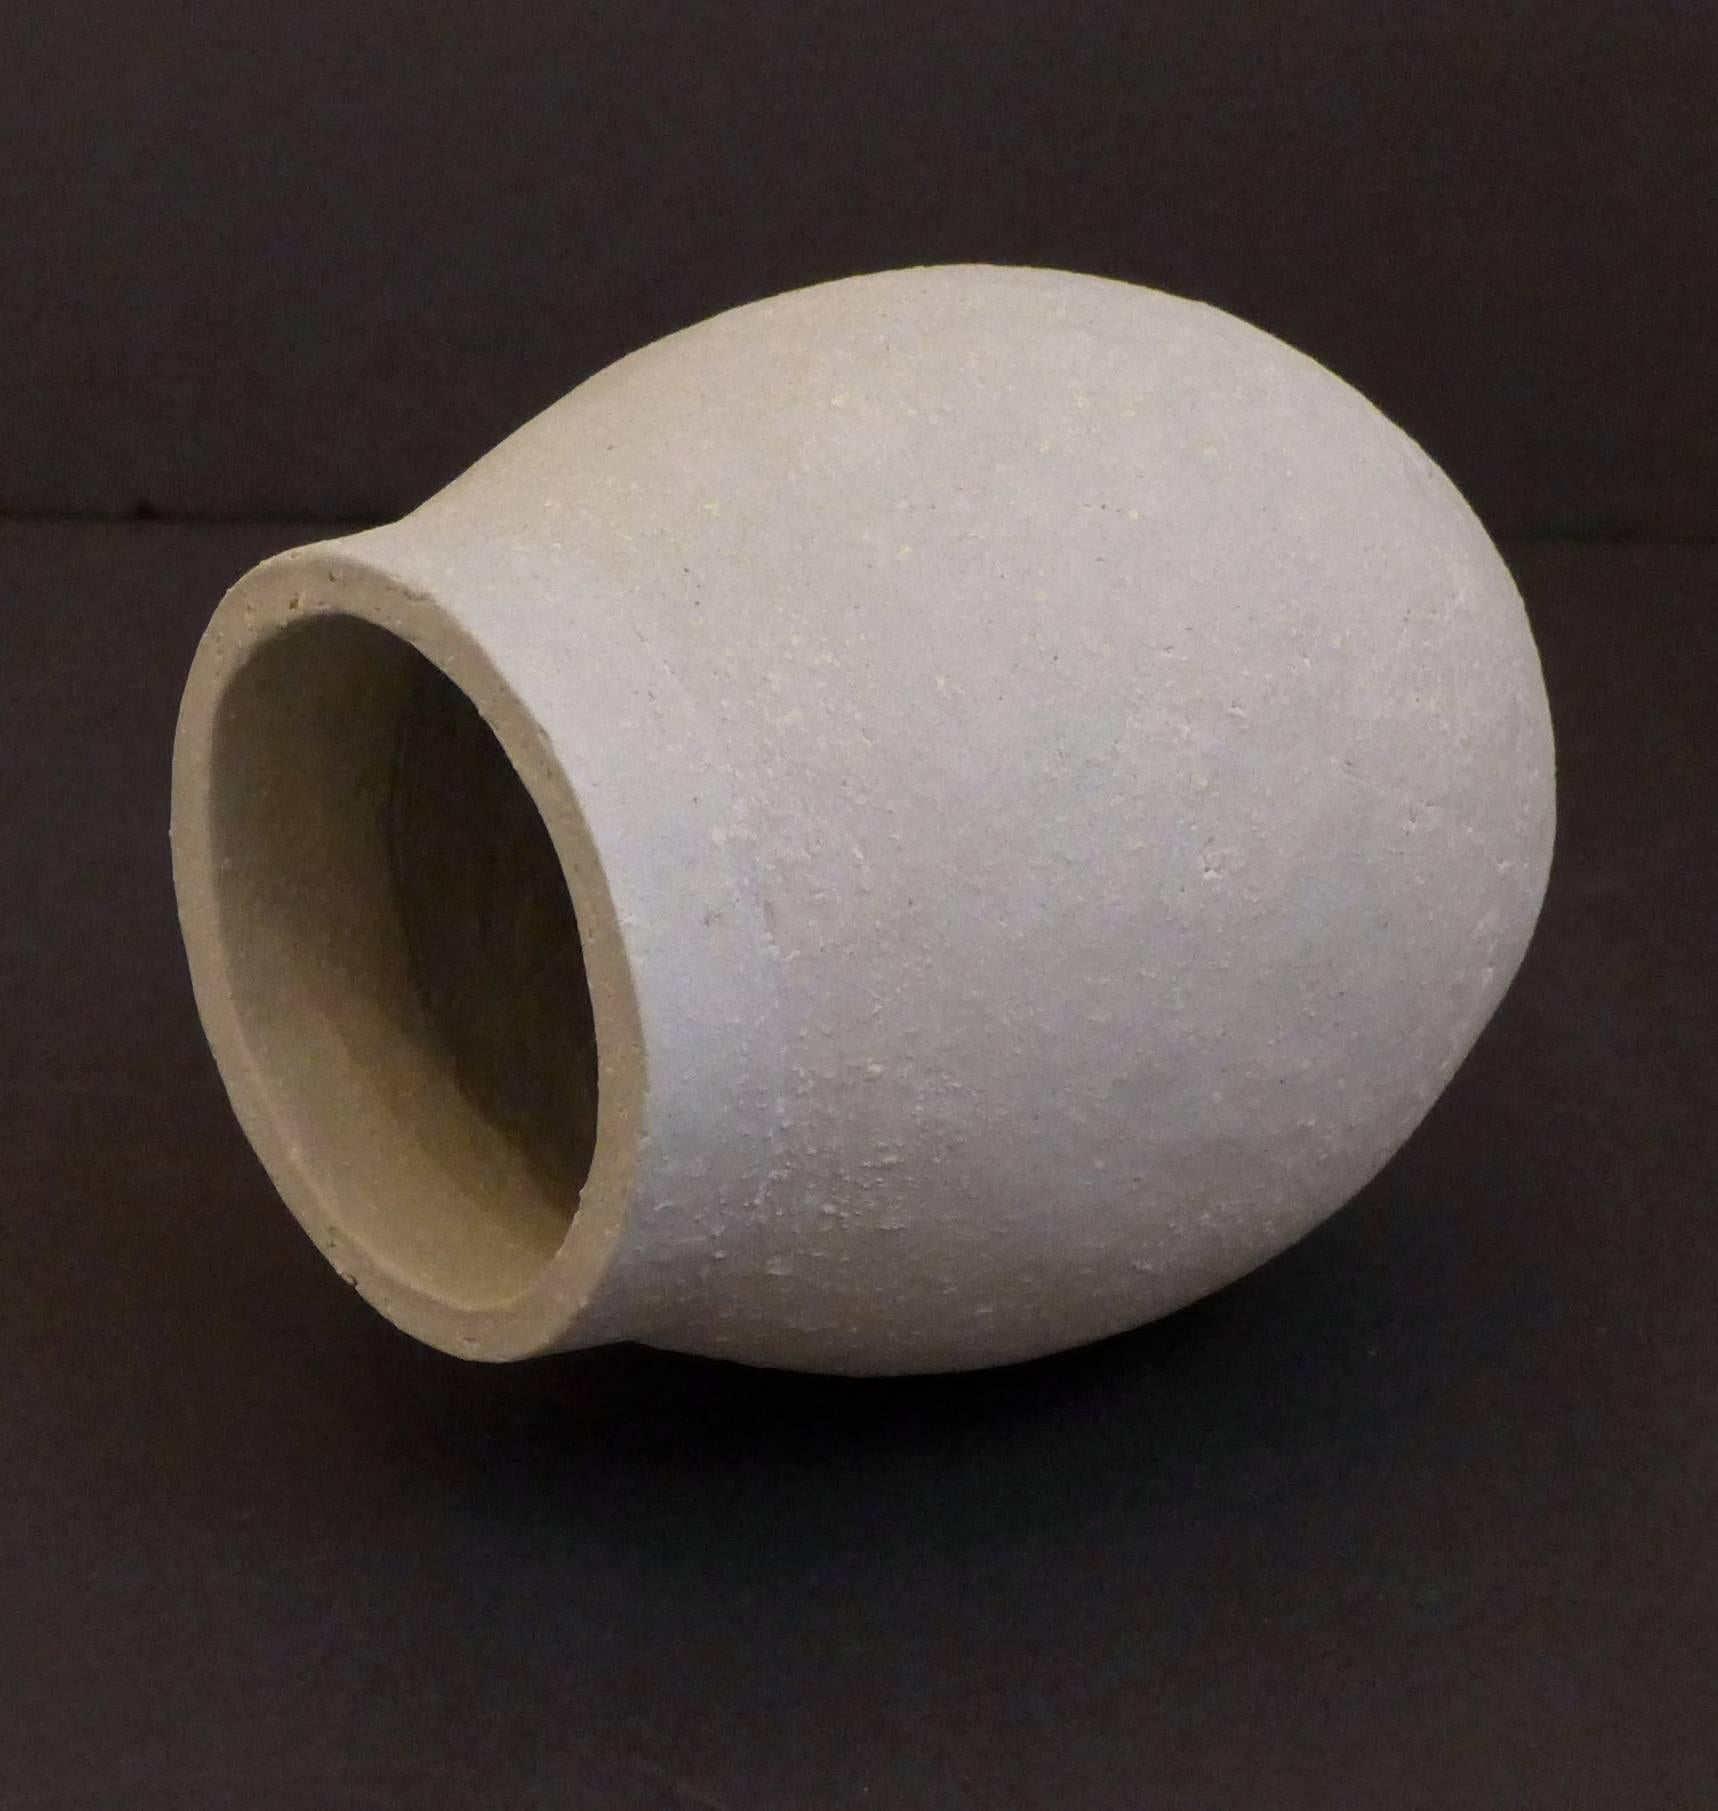 Sculptural Vessels in Gray by Sonja Duo-Meyer In Excellent Condition For Sale In New York, NY